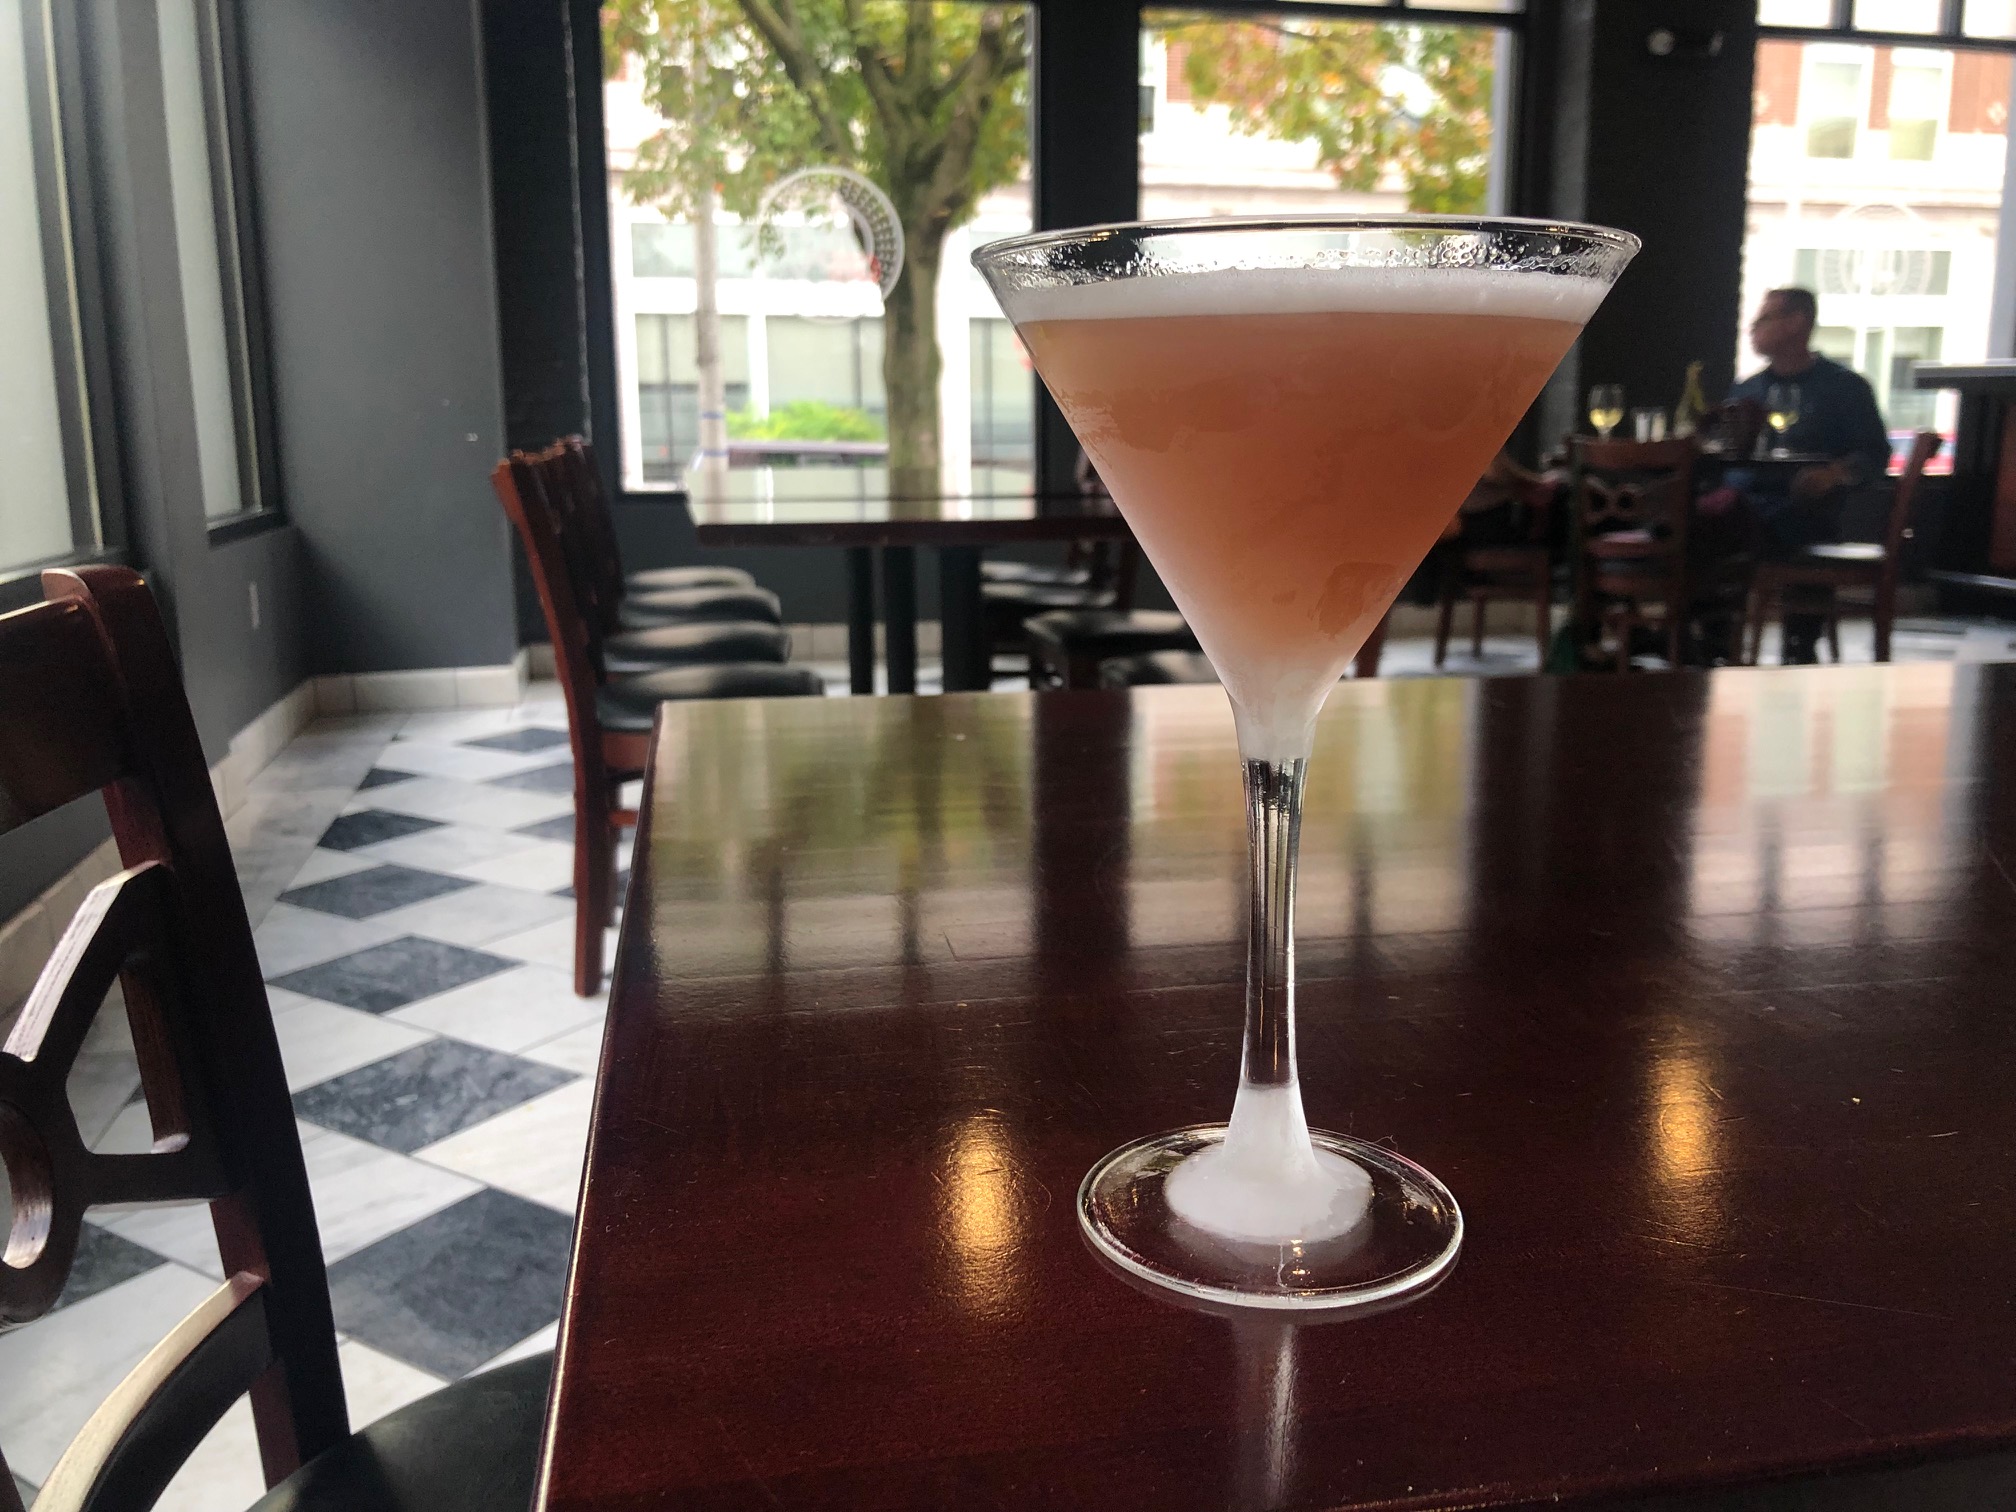 On a dark table in Hamilton Walker's front bar area, there is a French martini, a peach drink in a martini glass. Photo by Alyssa Buckley.